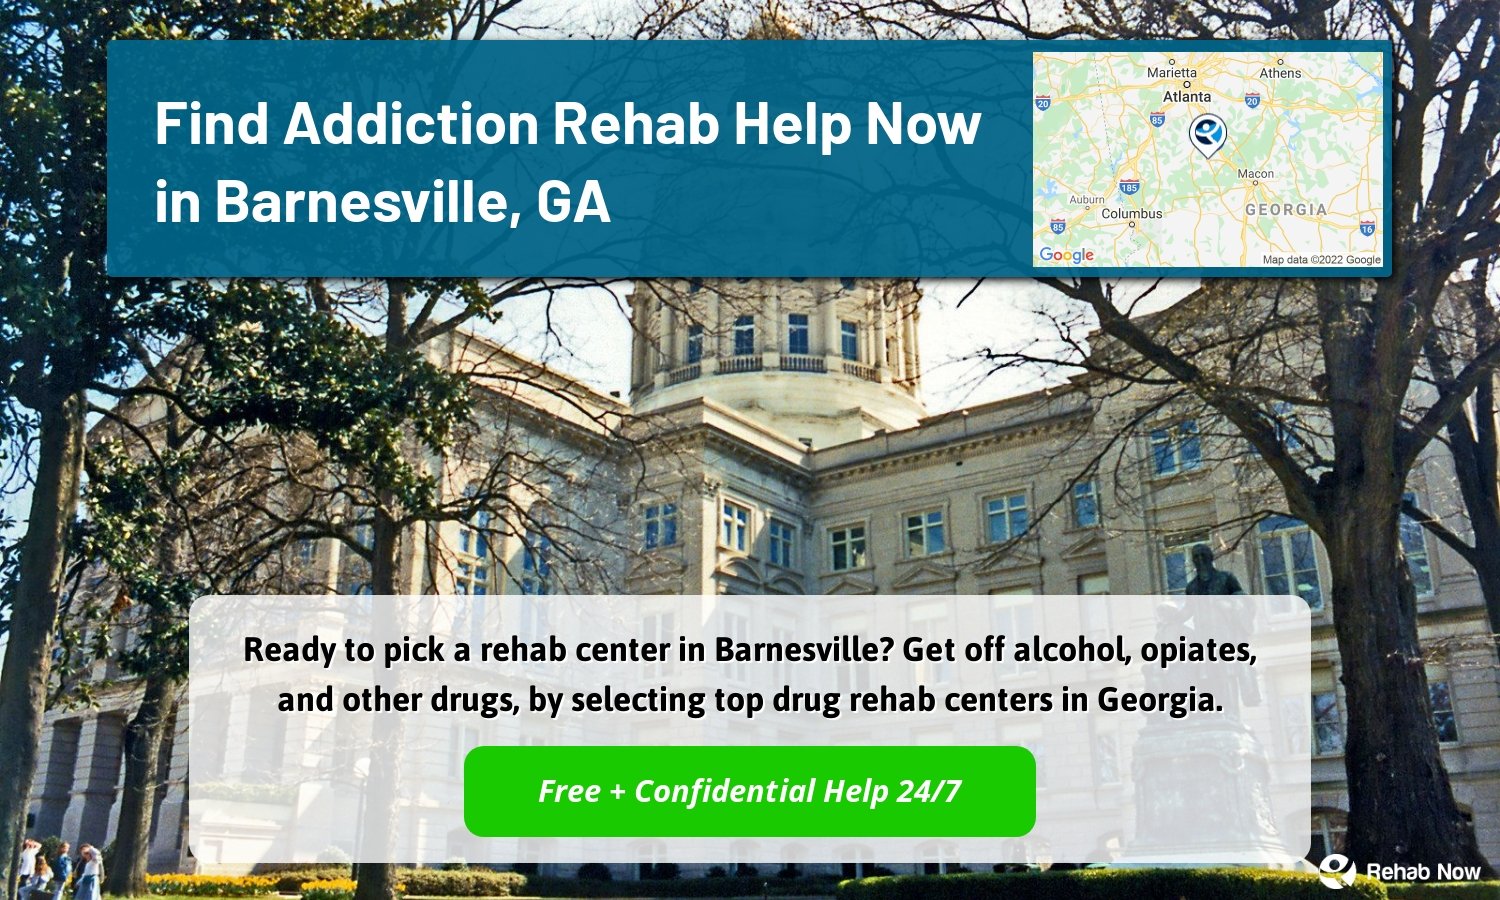 Ready to pick a rehab center in Barnesville? Get off alcohol, opiates, and other drugs, by selecting top drug rehab centers in Georgia.